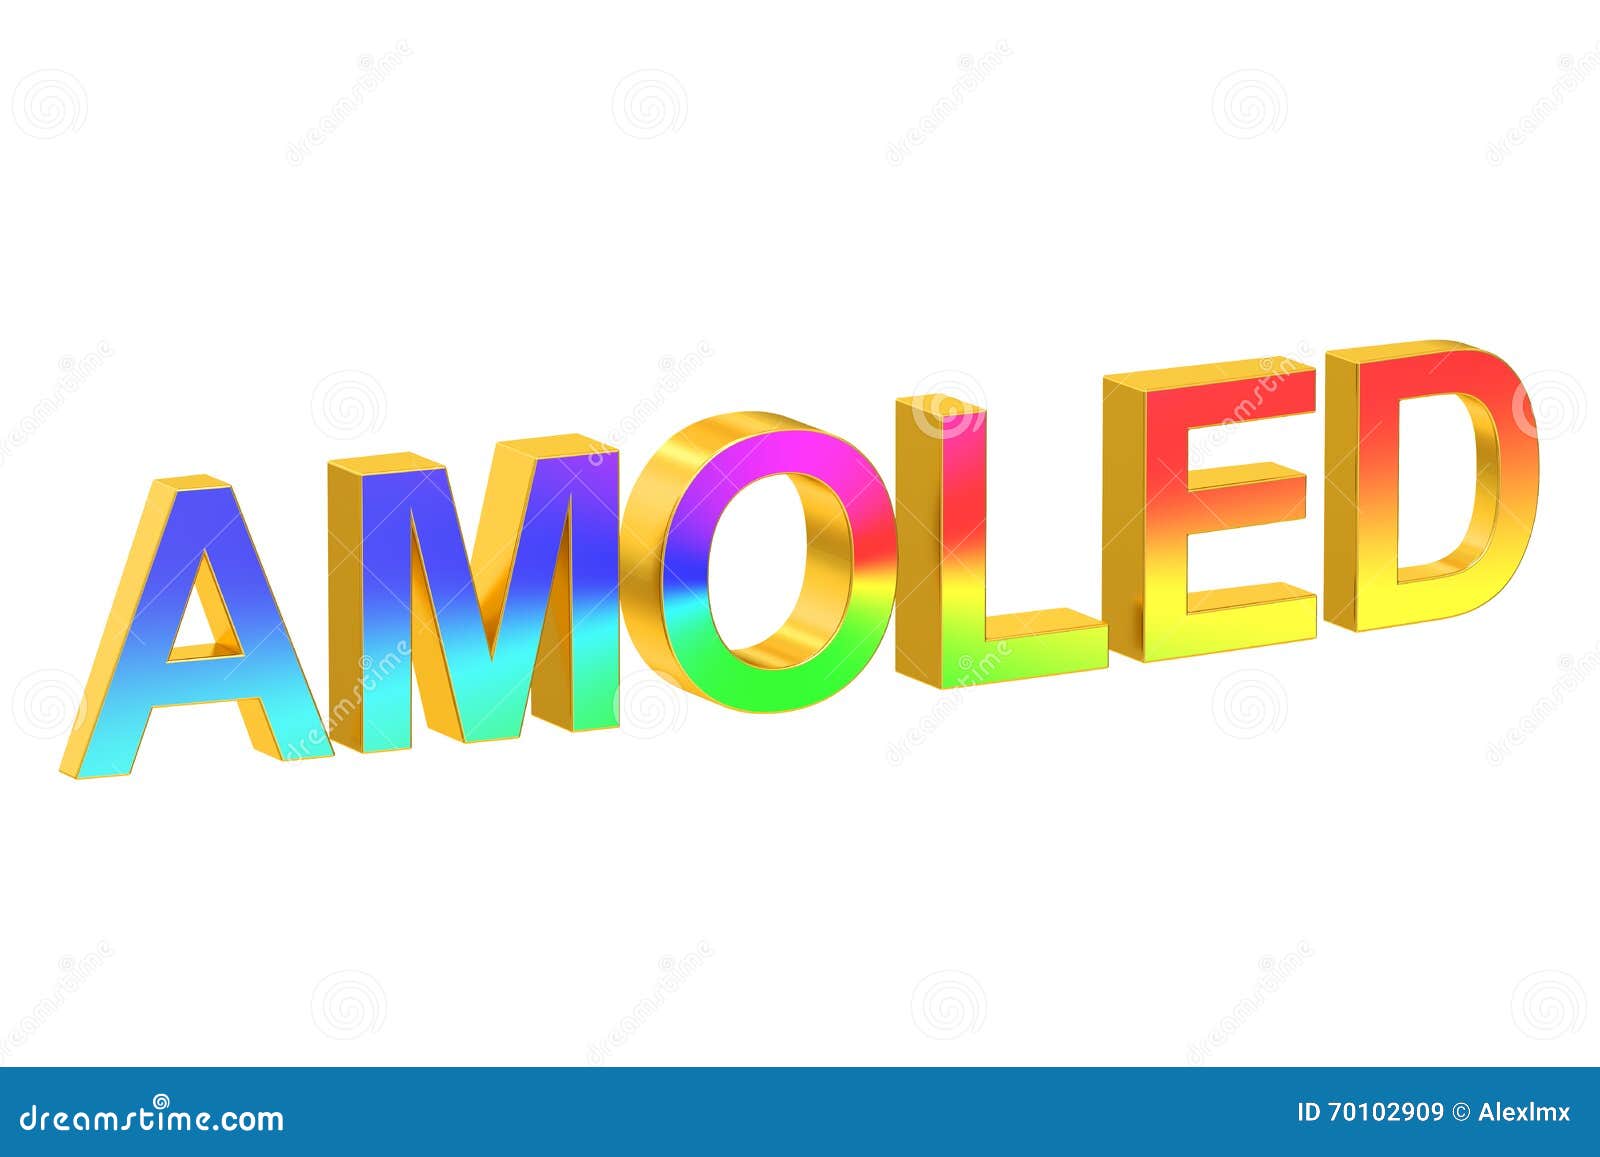 amoled concept, 3d rendering